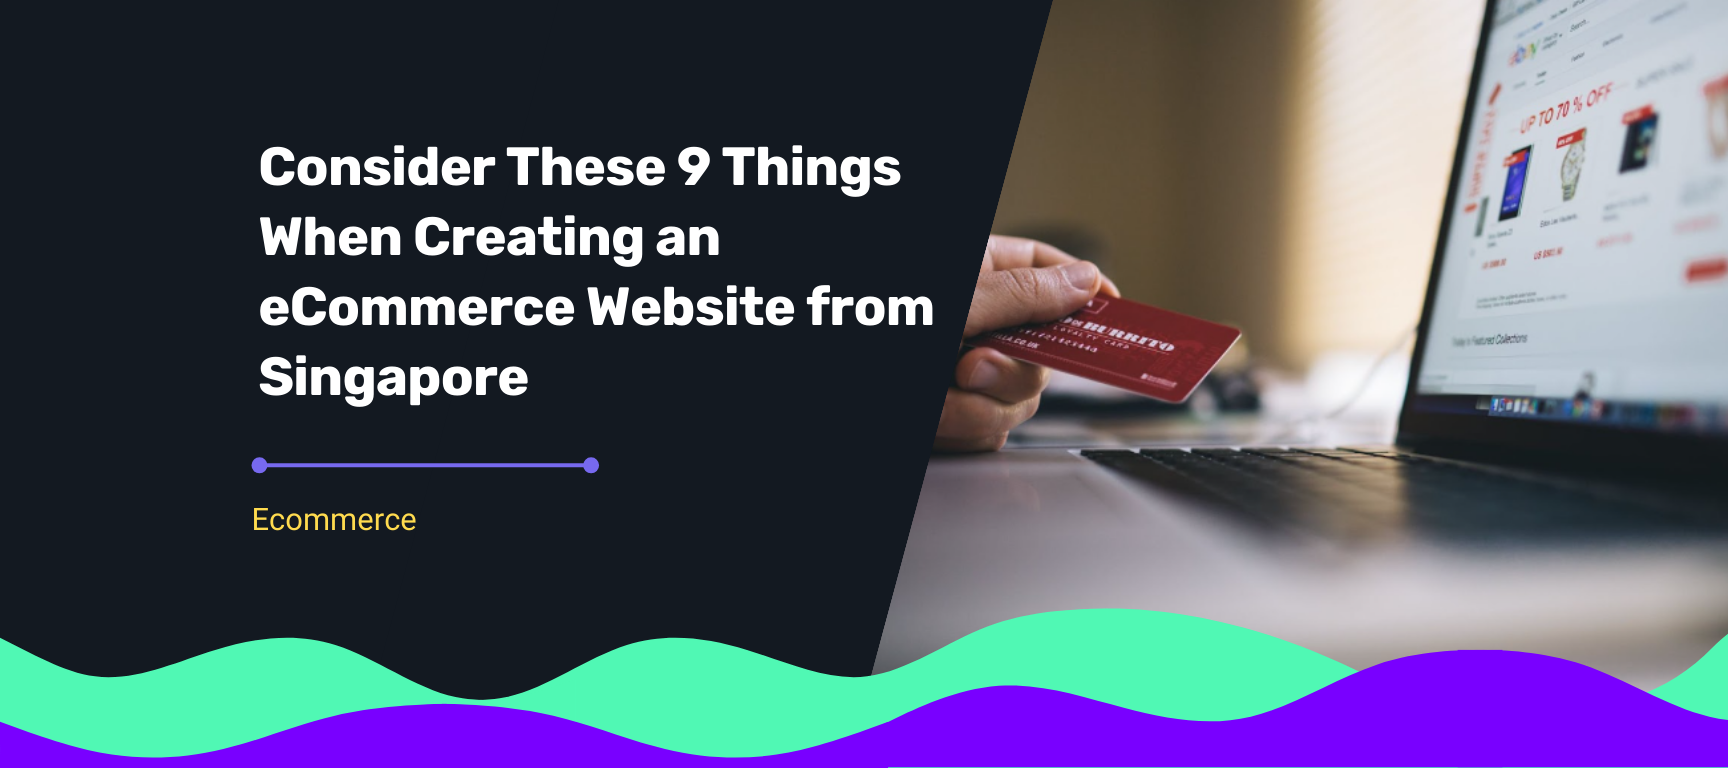 Consider These 9 Things When Creating an Ecommerce Website